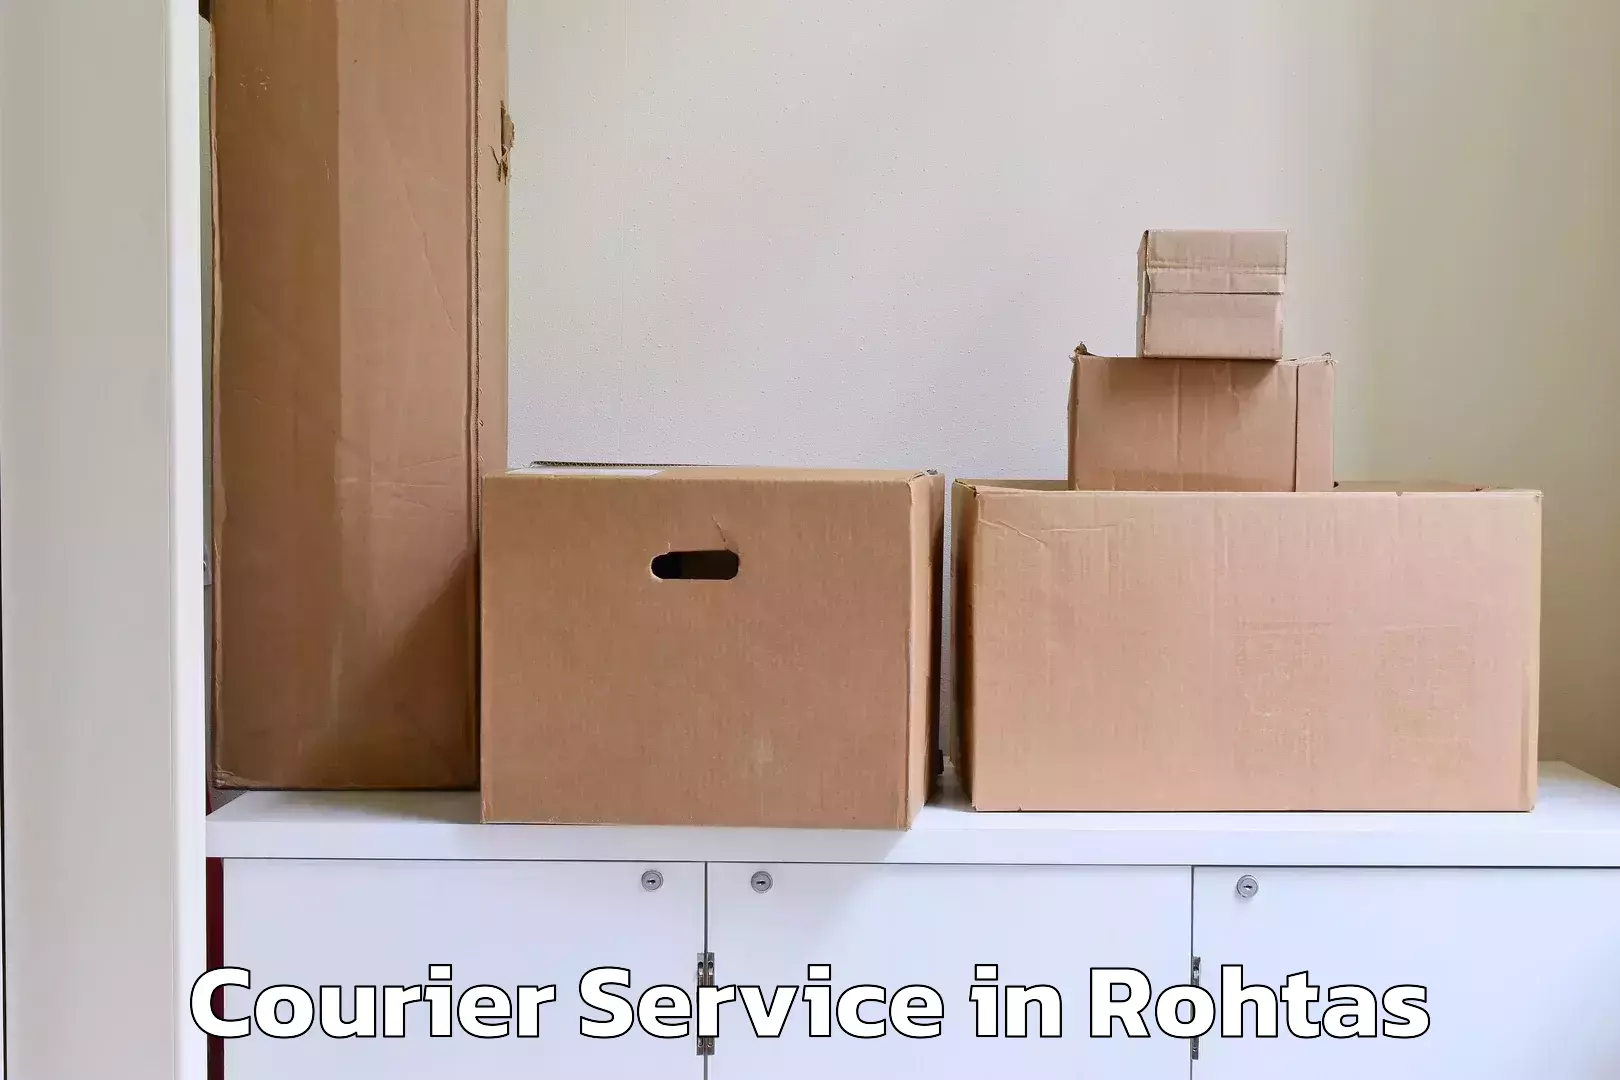 Urban courier service in Rohtas